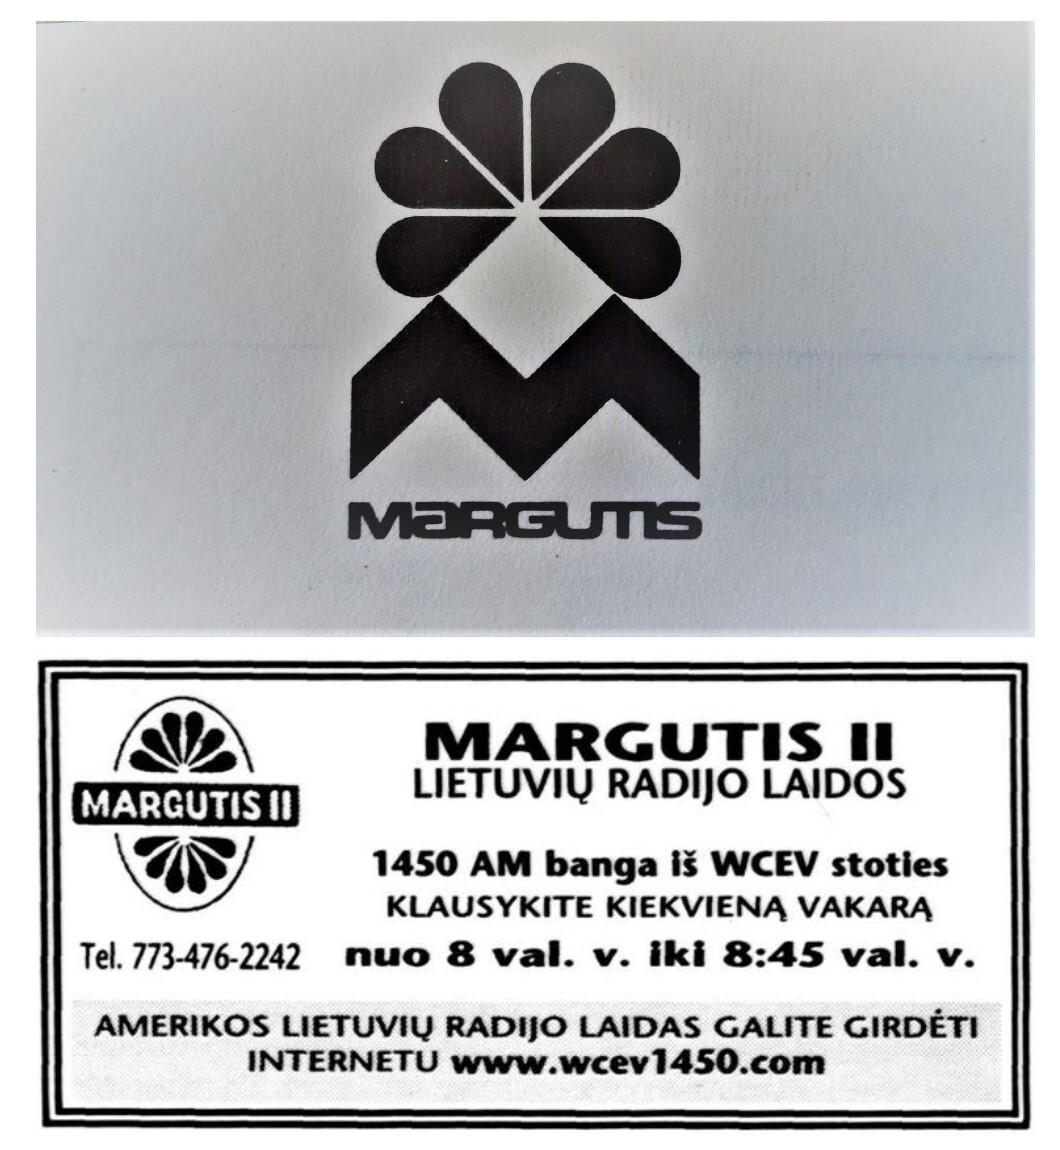 The “Margutis” logo from earlier times. Below, an ad in "Friend" for “Margutis II”, June 27, 2007<br />
<br />
